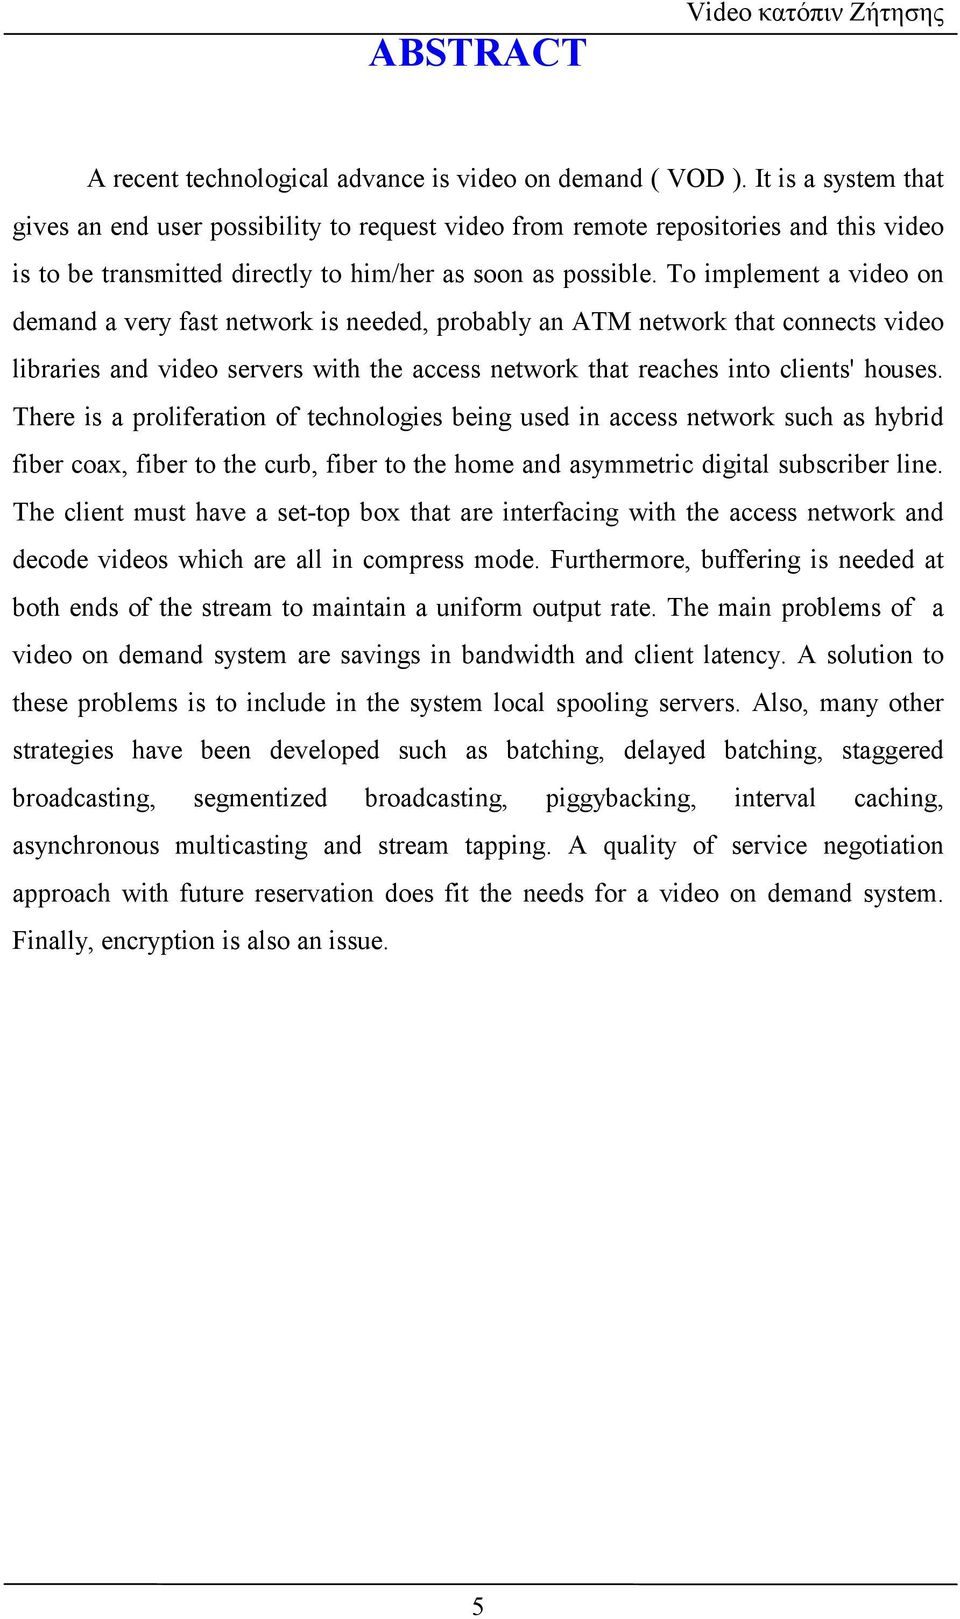 To implement a video on demand a very fast network is needed, probably an ATM network that connects video libraries and video servers with the access network that reaches into clients' houses.